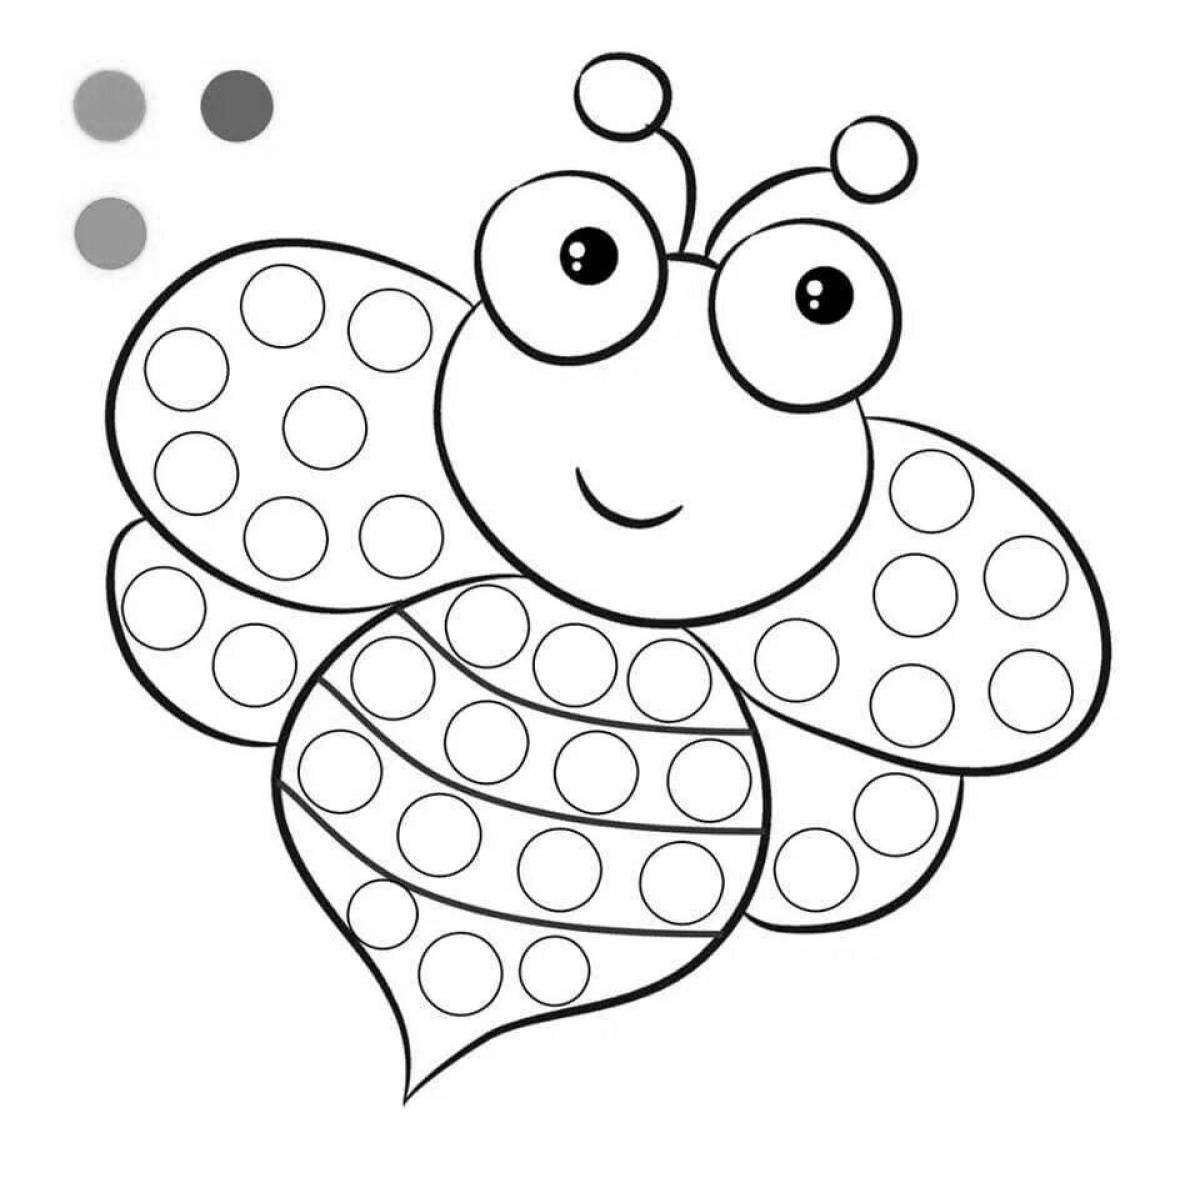 Playful simulation coloring page